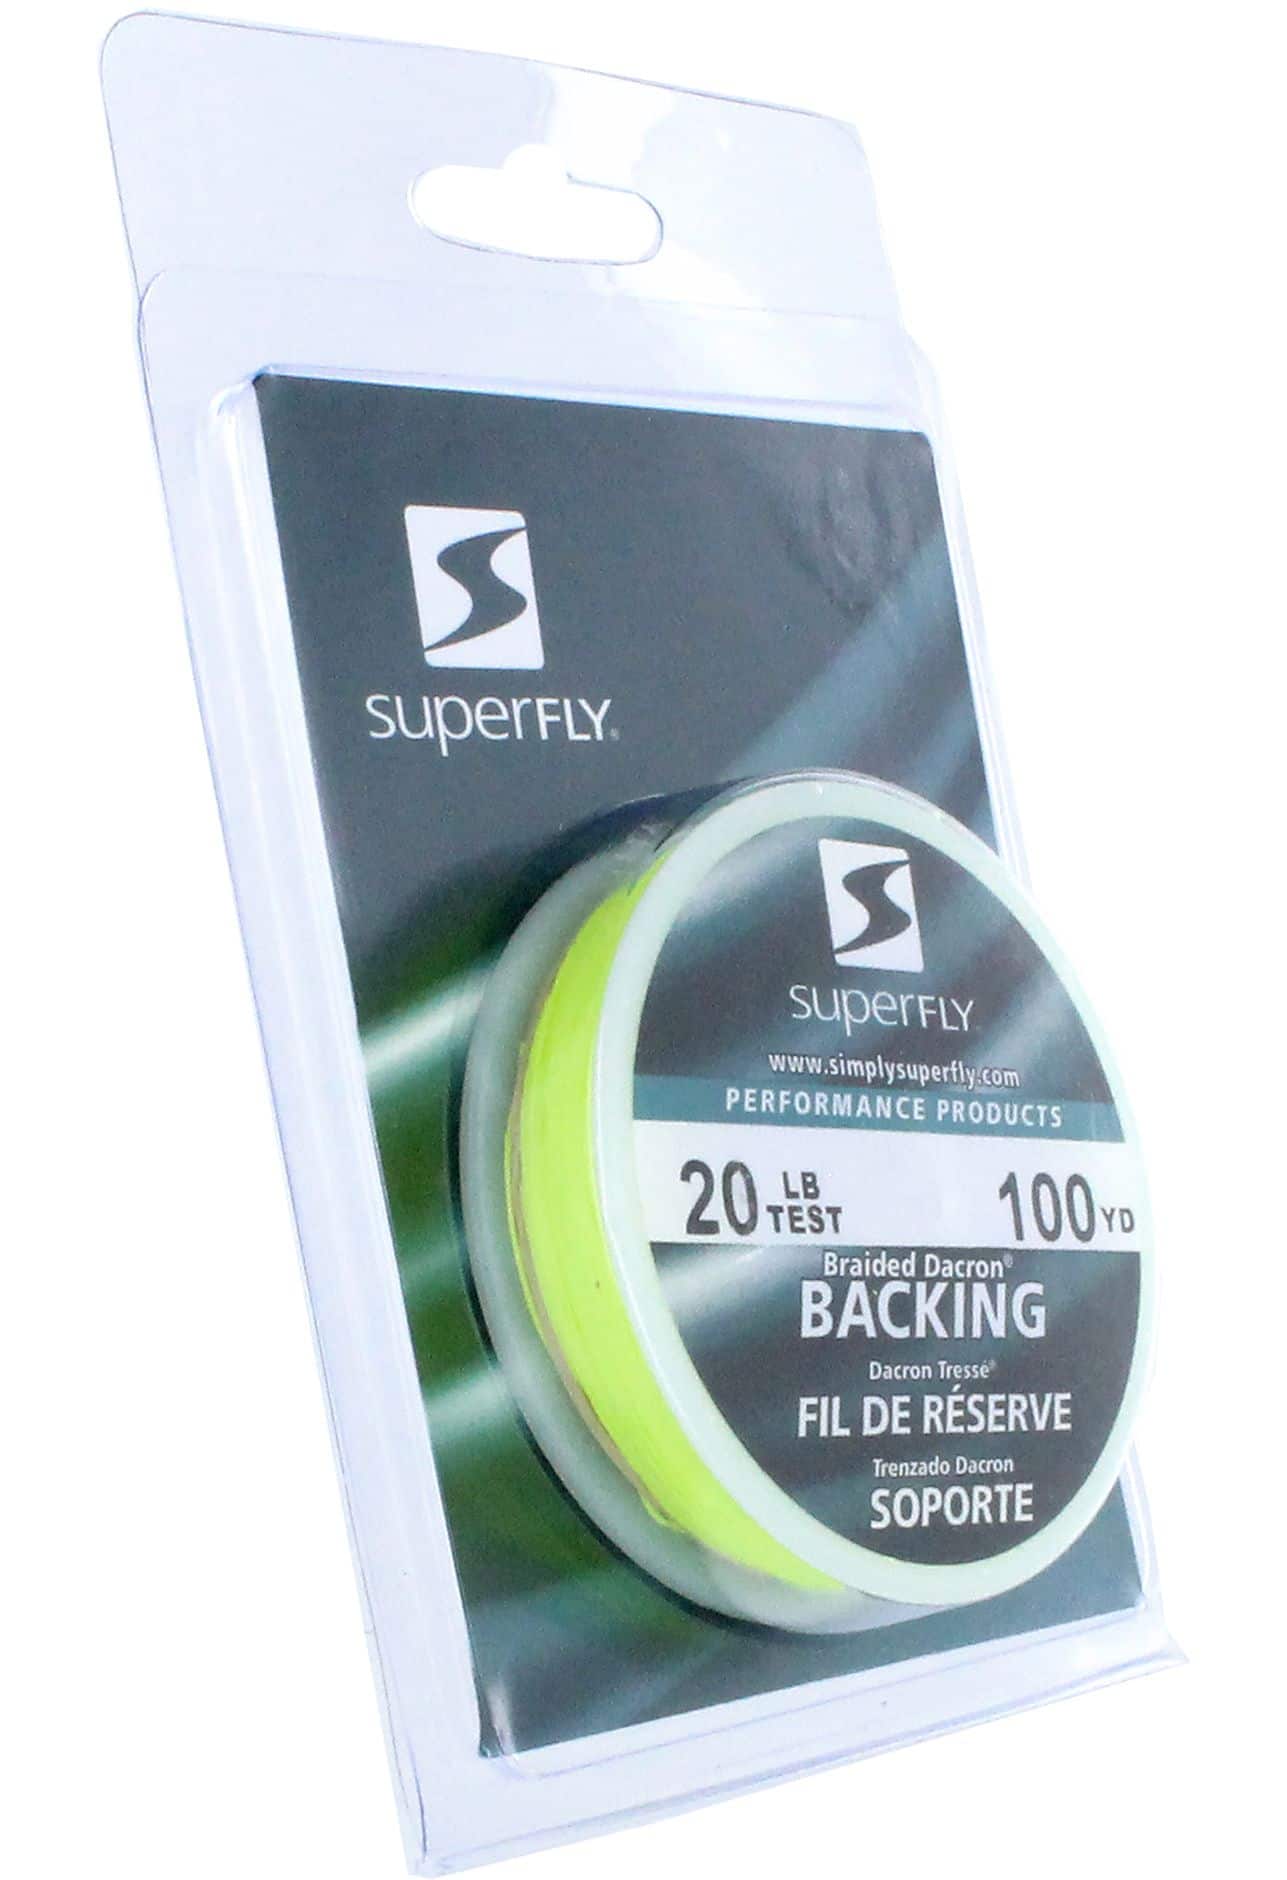 https://media-www.canadiantire.ca/product/playing/fishing/fishing-equipment/1784020/superfly-backing-20-lb-100yd-chartreuse-750da627-28a1-4ee8-b0f0-dc1720e11f79-jpgrendition.jpg